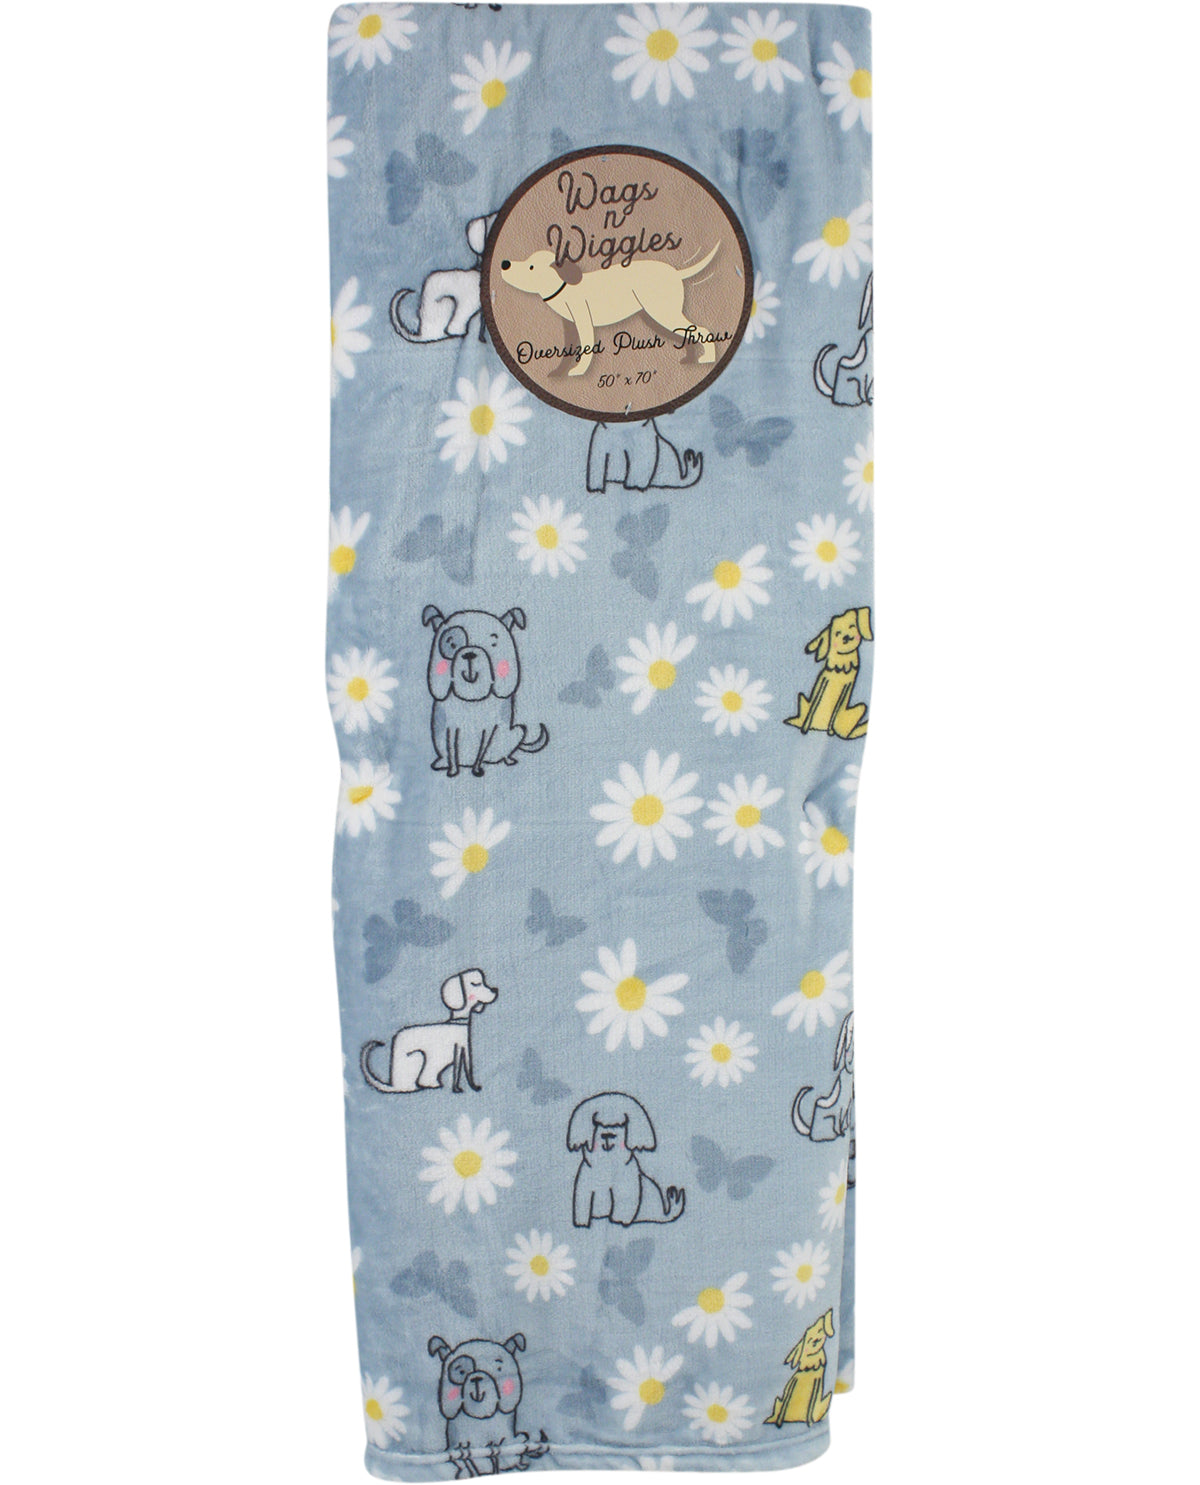 "Dogs, Daisies, And Butterflies Oh My!" Hanging Throw